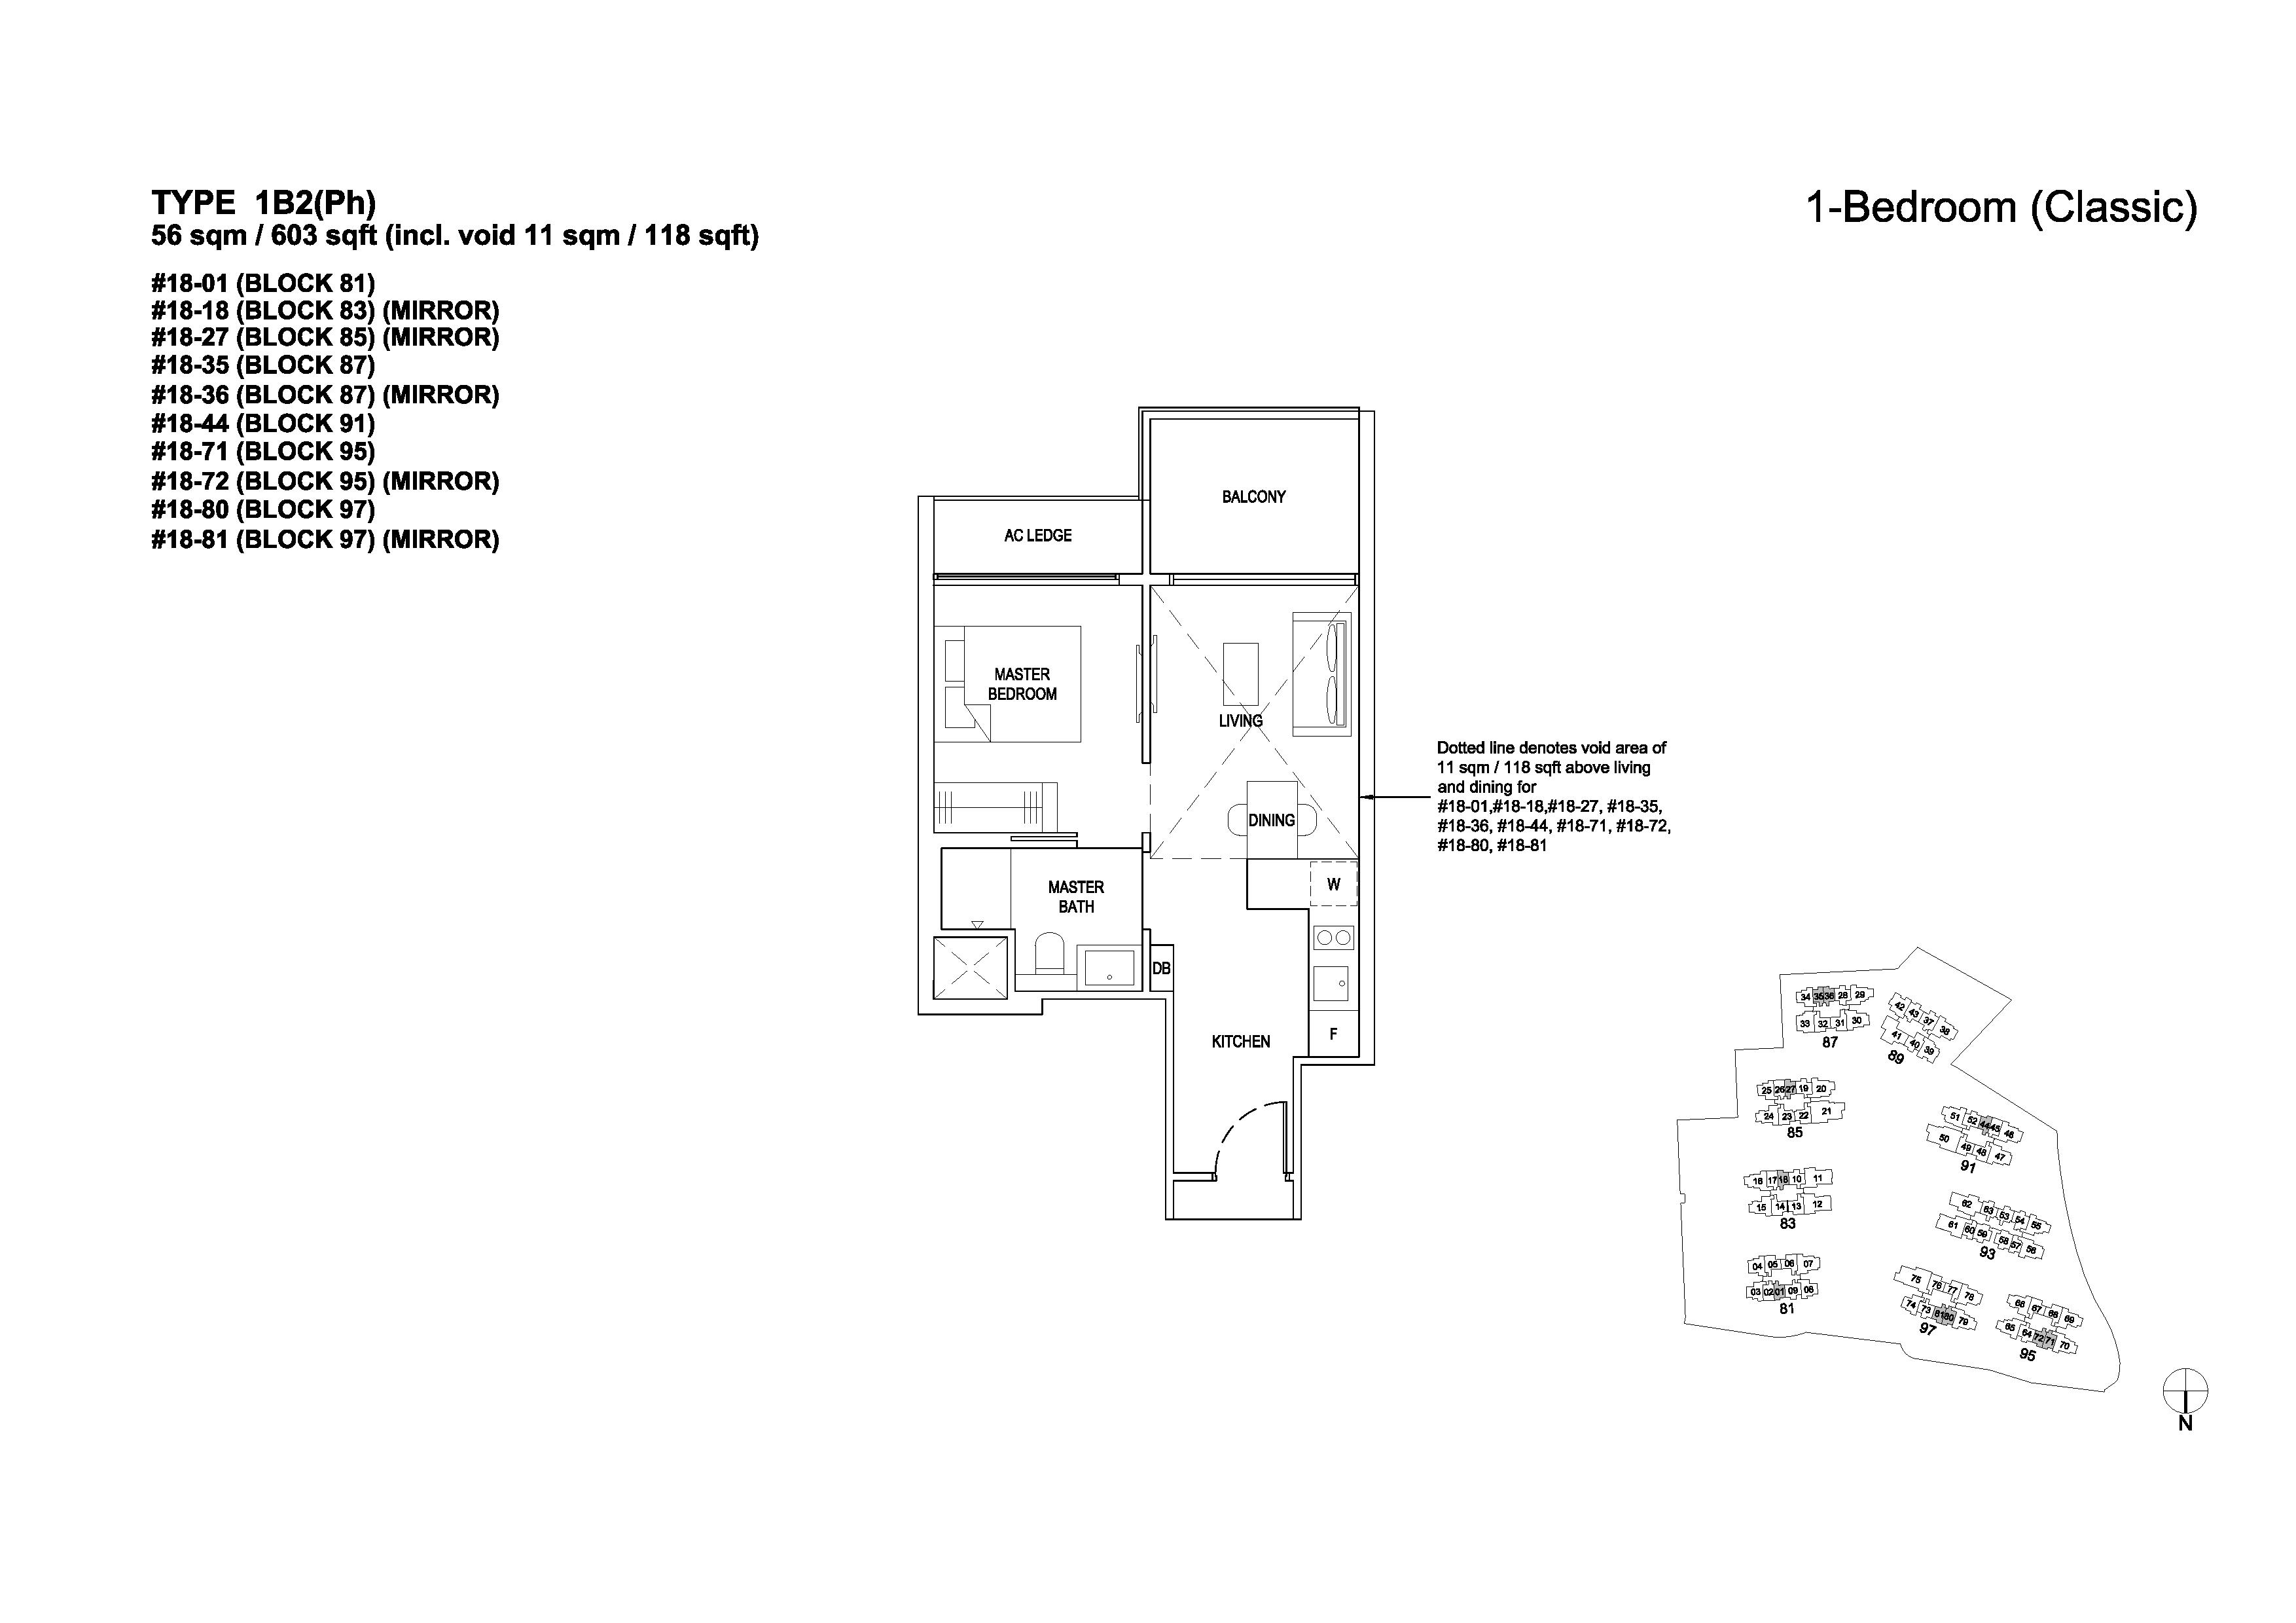 The Florence Residences 1 Bedroom Classic Type 1B2(Ph) Floor Plans